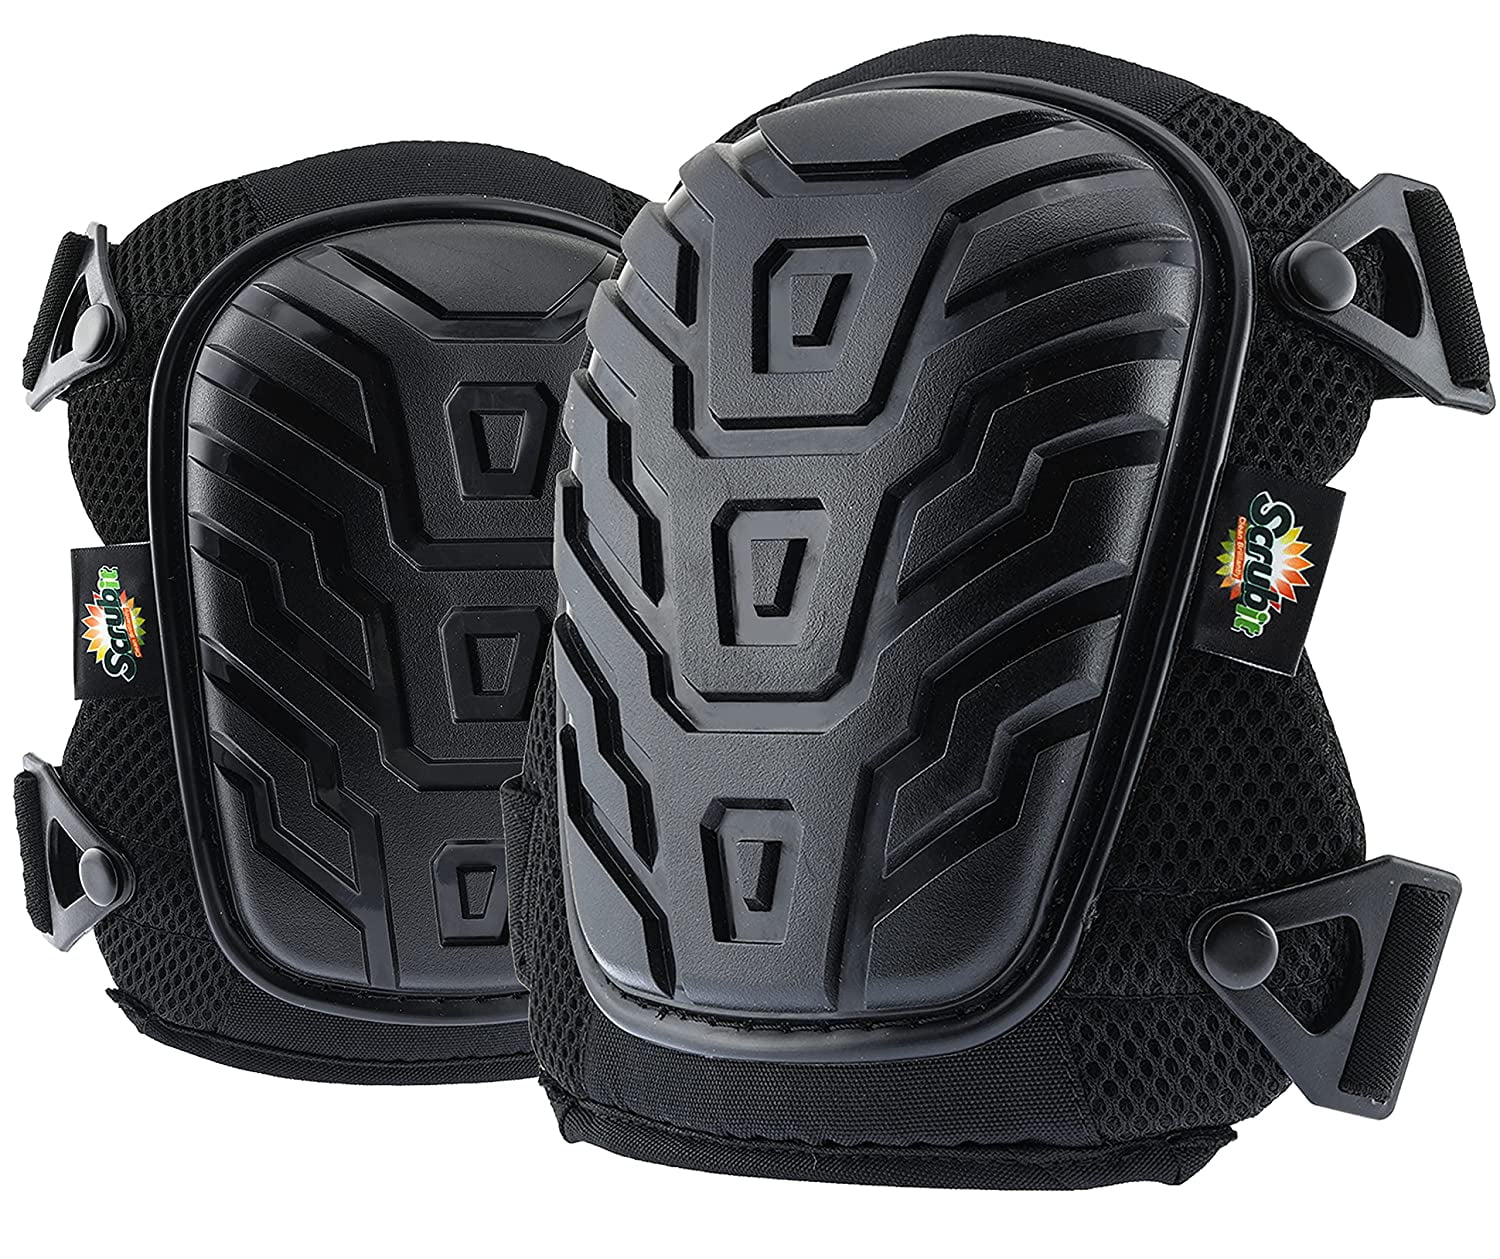 Scrubit Knee Pads for Work - Universal Fit for Men and Women ...